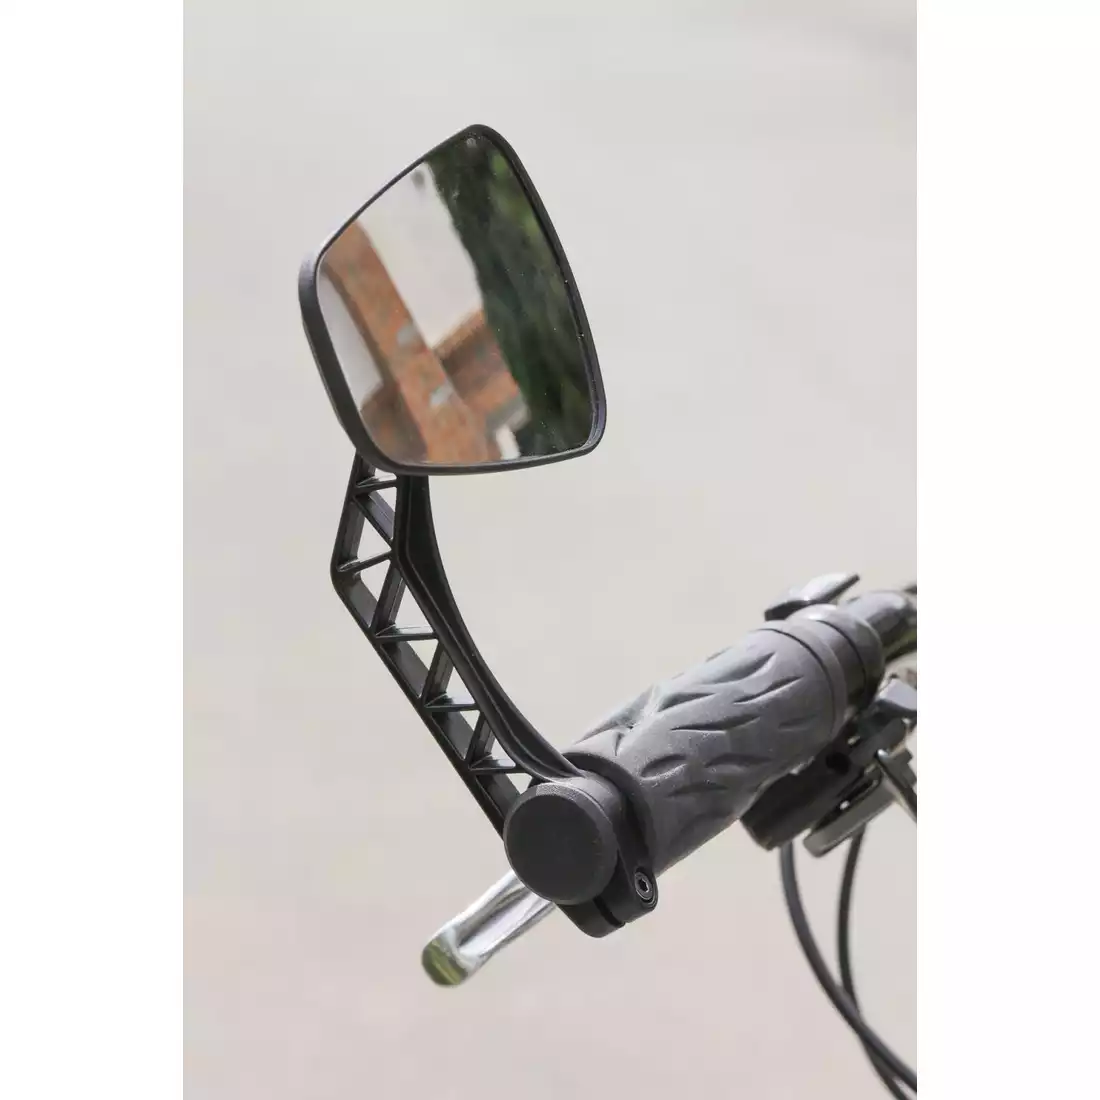 ZEFAL ZL TOWER 80 Universal bicycle mirror